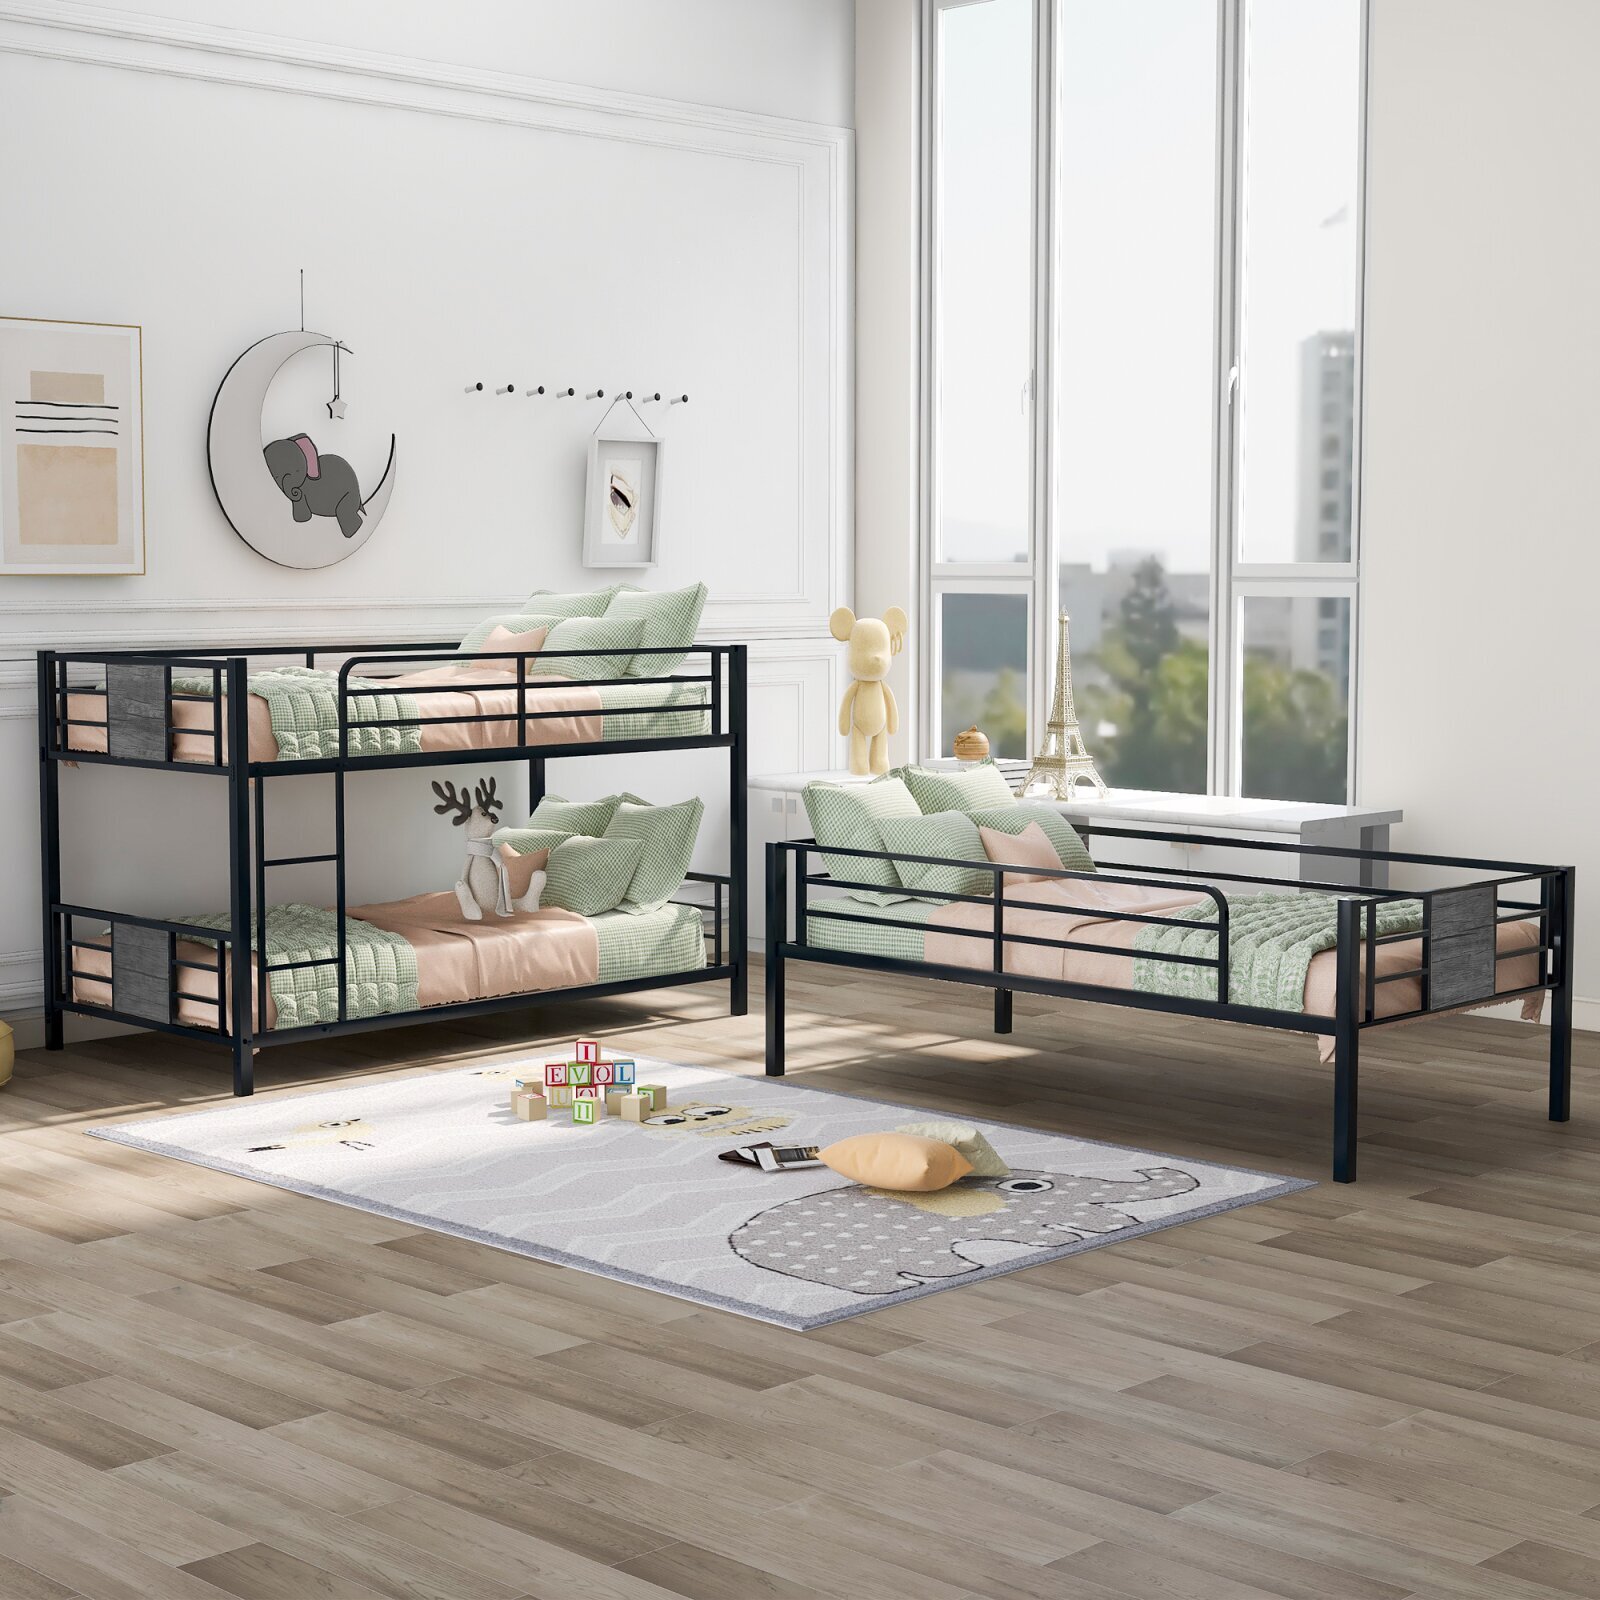 Metal Triple Bunk Bed That Can Be Separated 